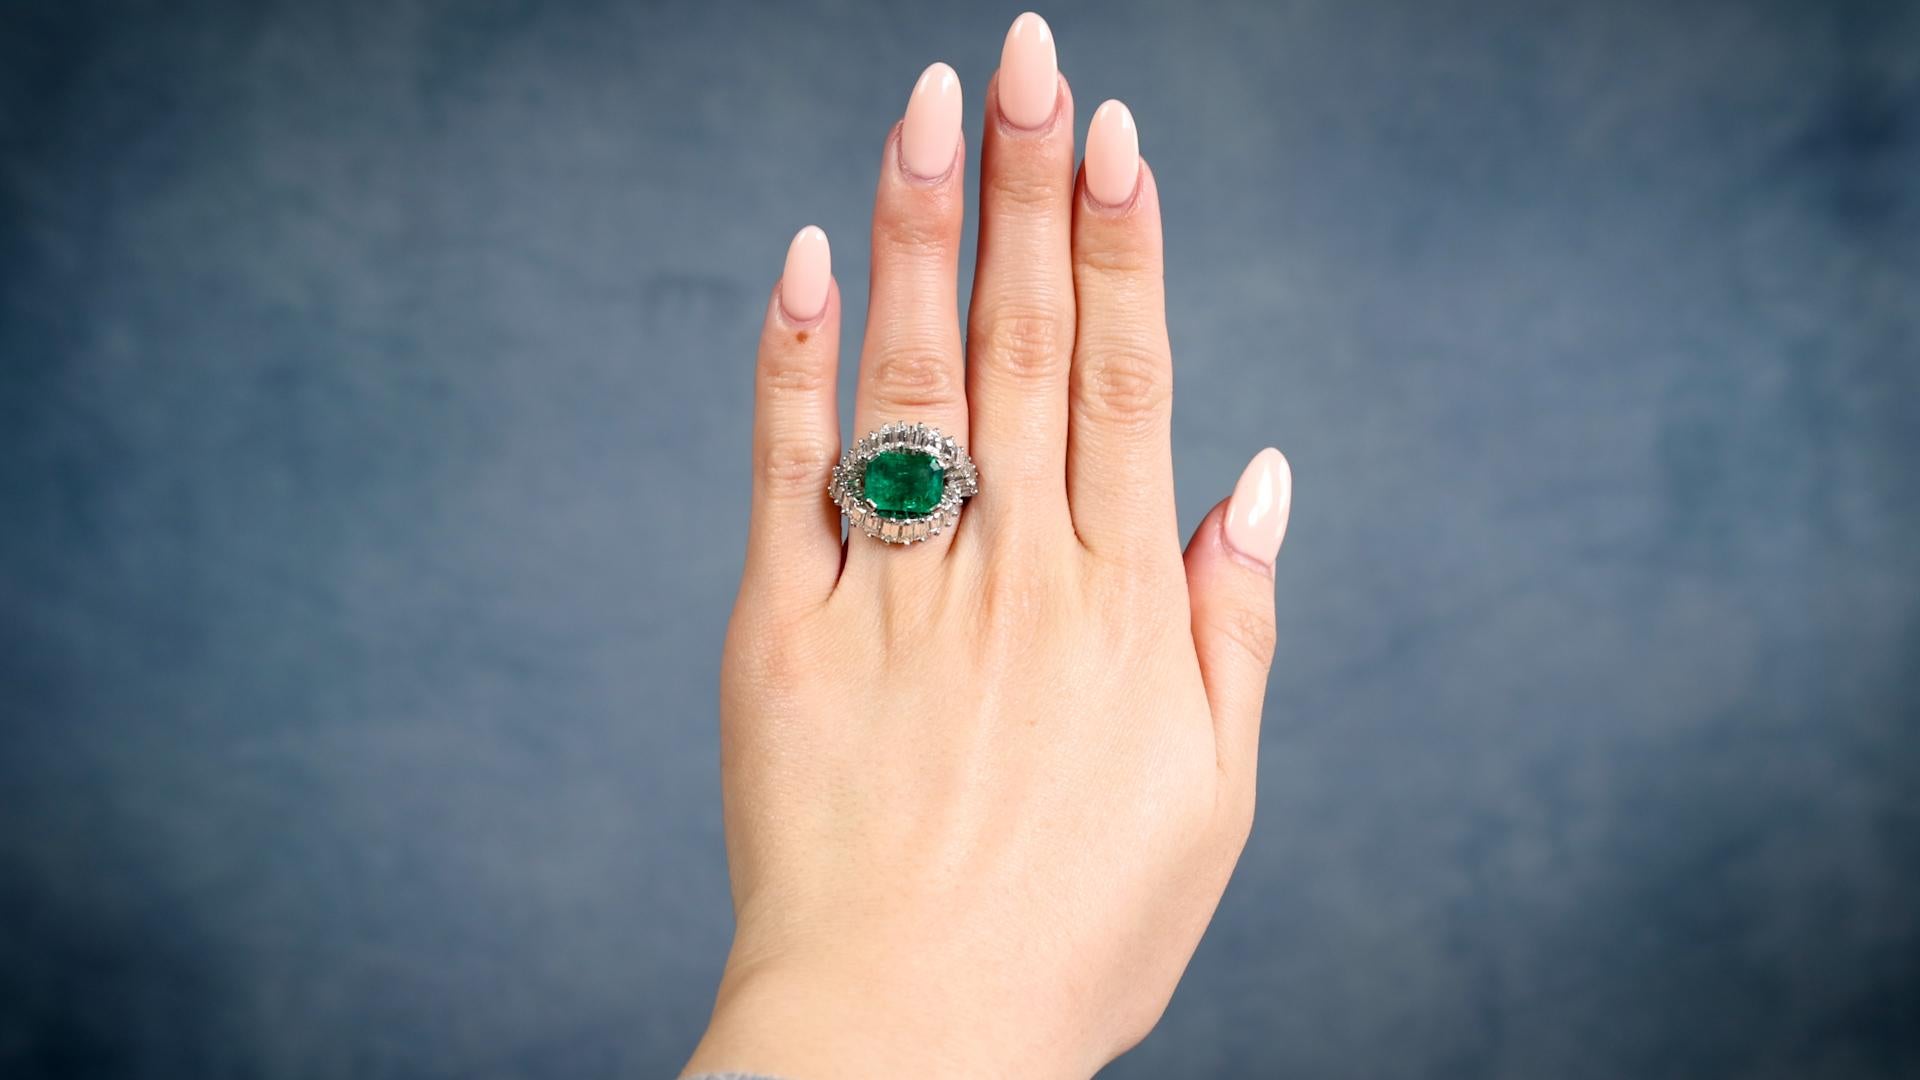 One Mid-Century AGL Colombian Minor Oil Emerald Diamond Cocktail Ring. Featuring one AGL octagonal cut emerald weighing 3.72 carats, accompanied by AGL #1138263 stating the Colombian origin with minor oil treatments. Accented by 26 baguette cut